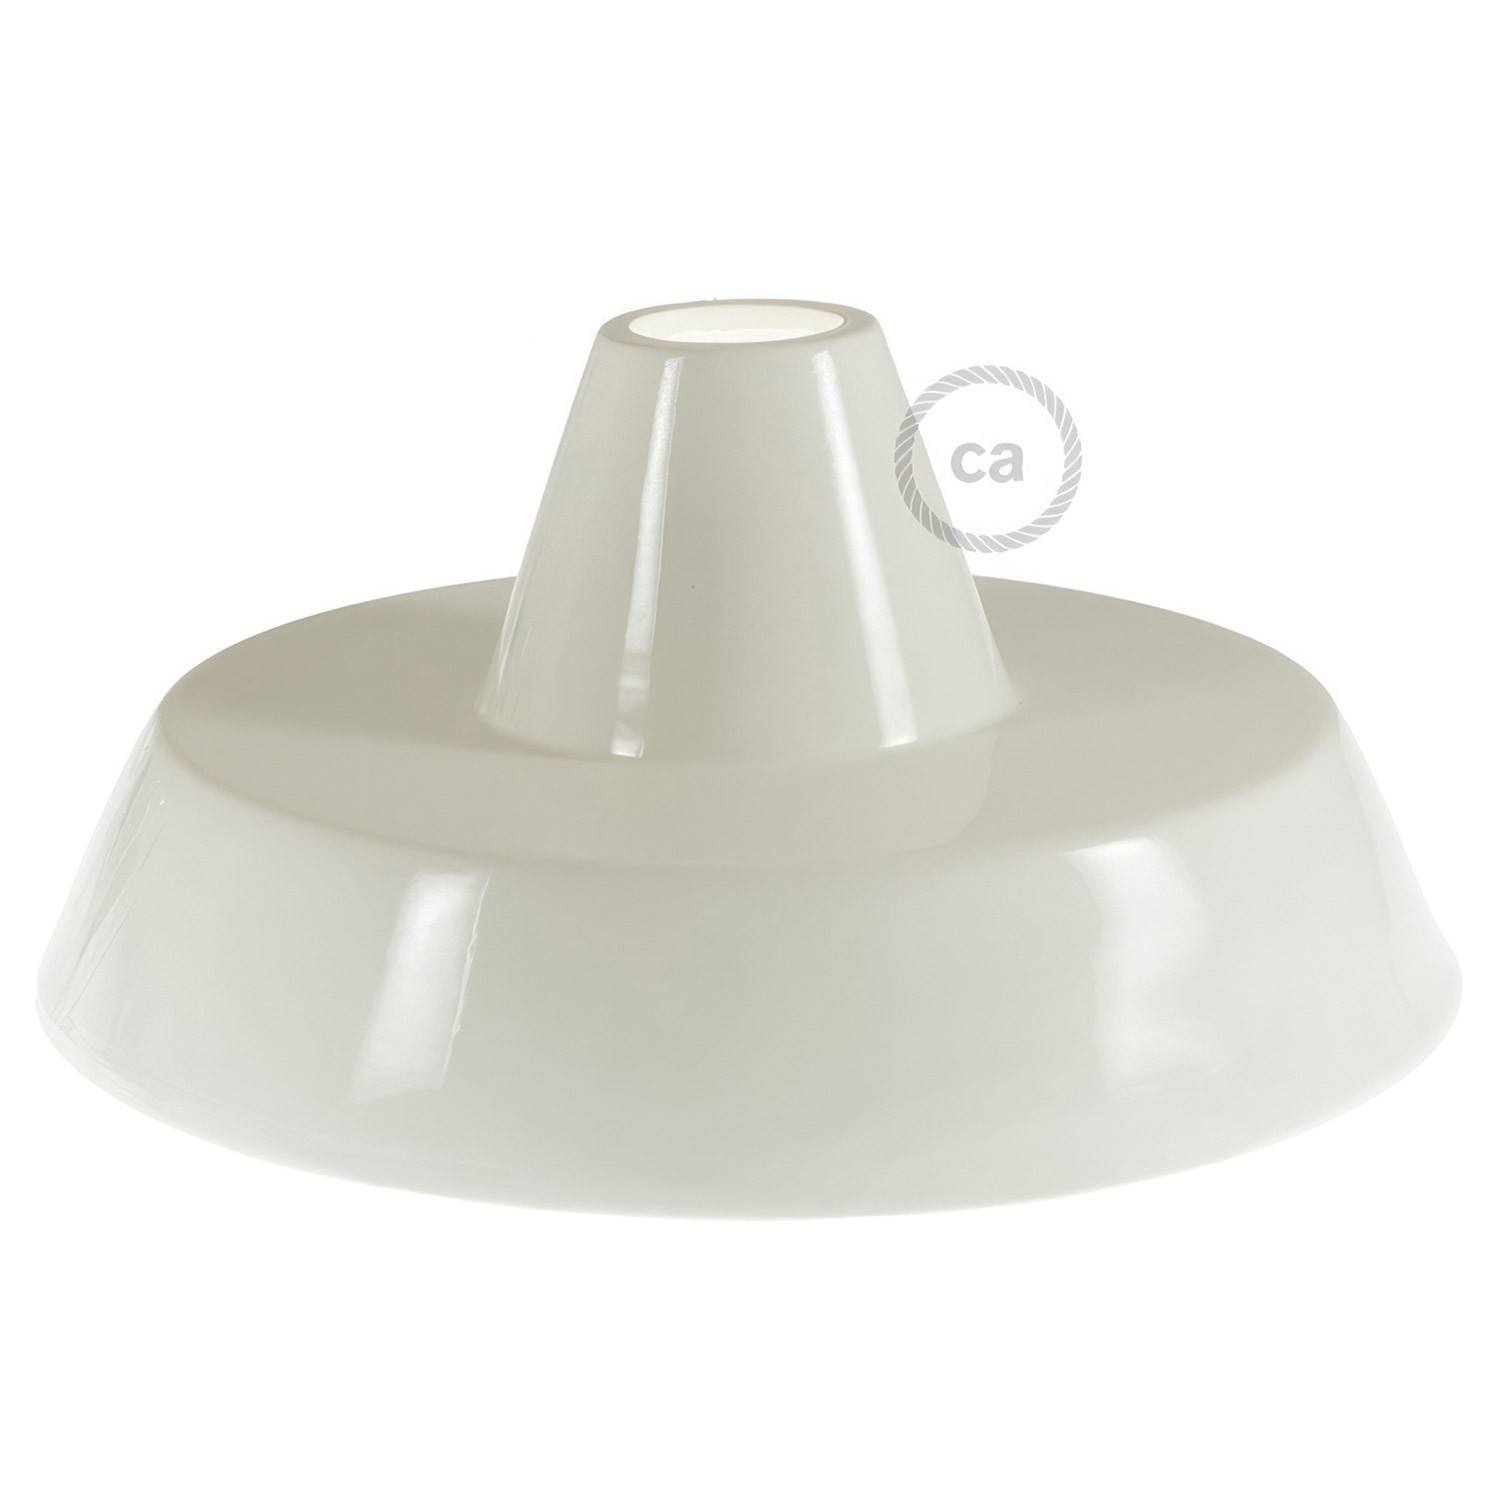 Industrial Ceramic lampshade for suspension - Made in Italy